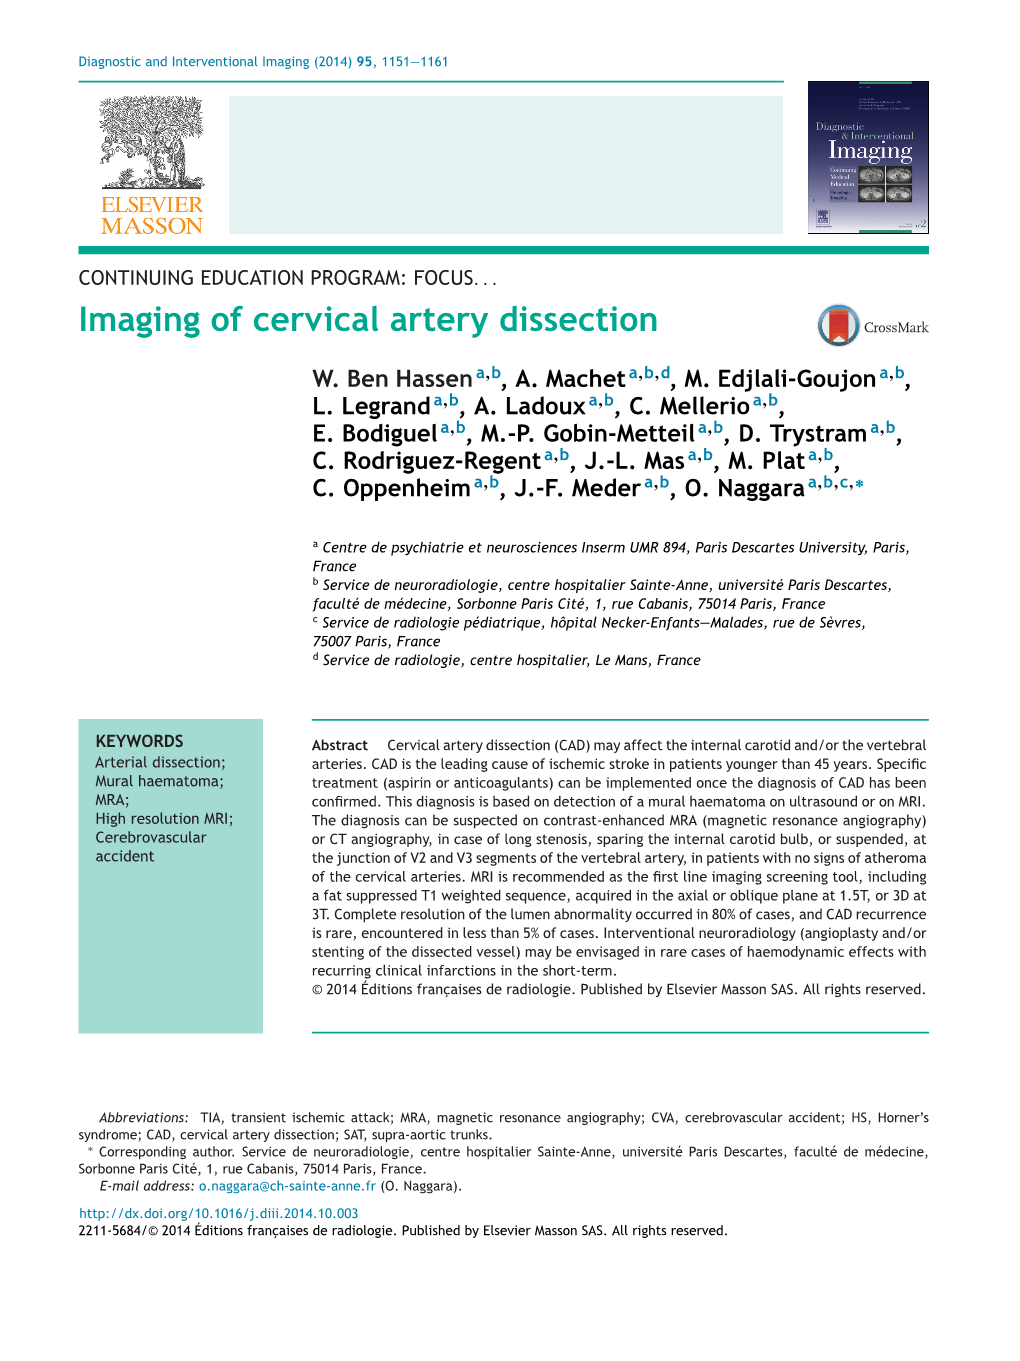 Imaging of Cervical Artery Dissection